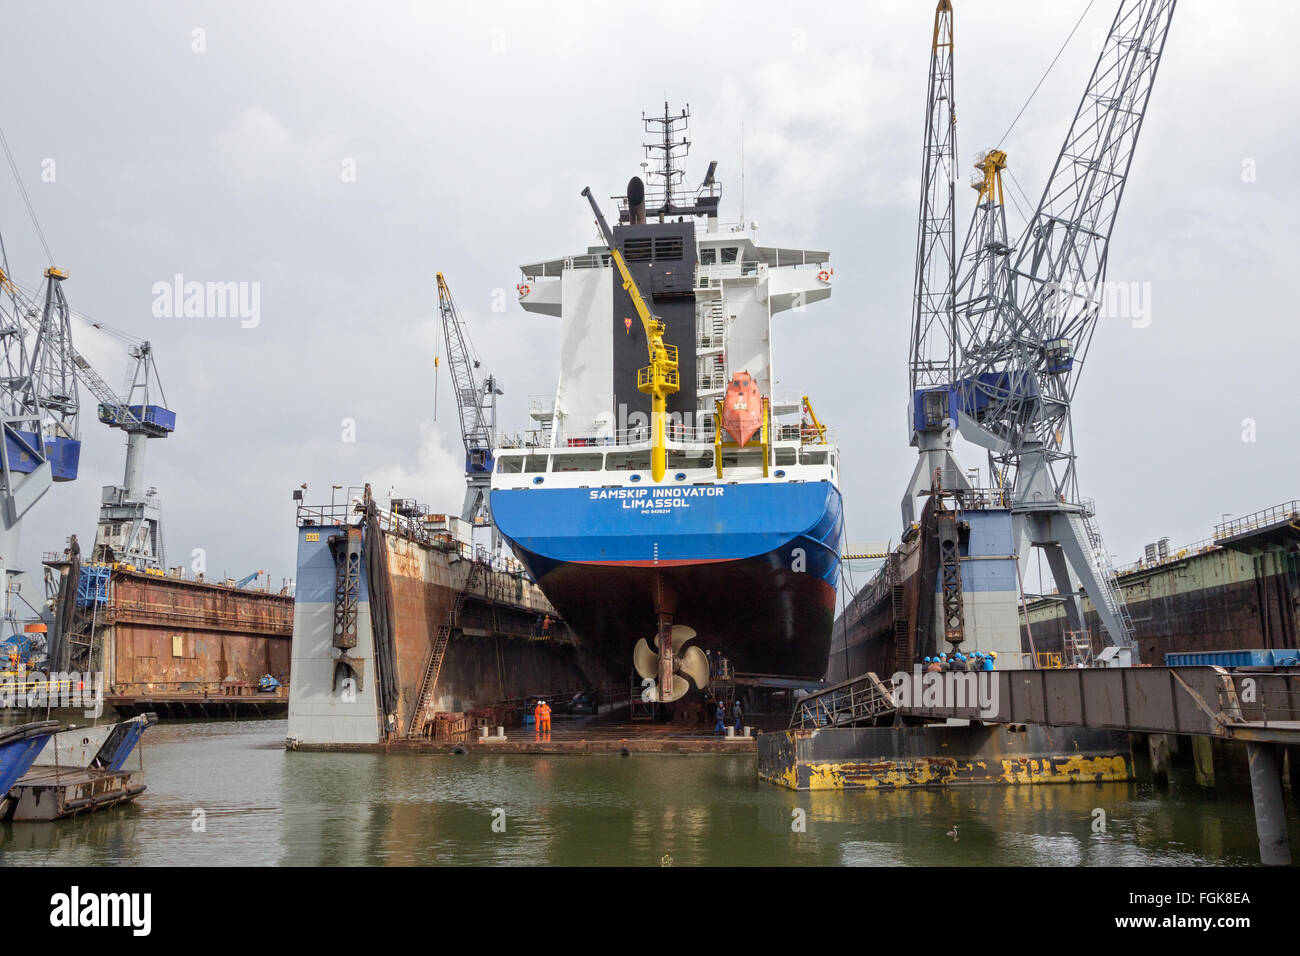 Container ship in a repair dock Stock Photo